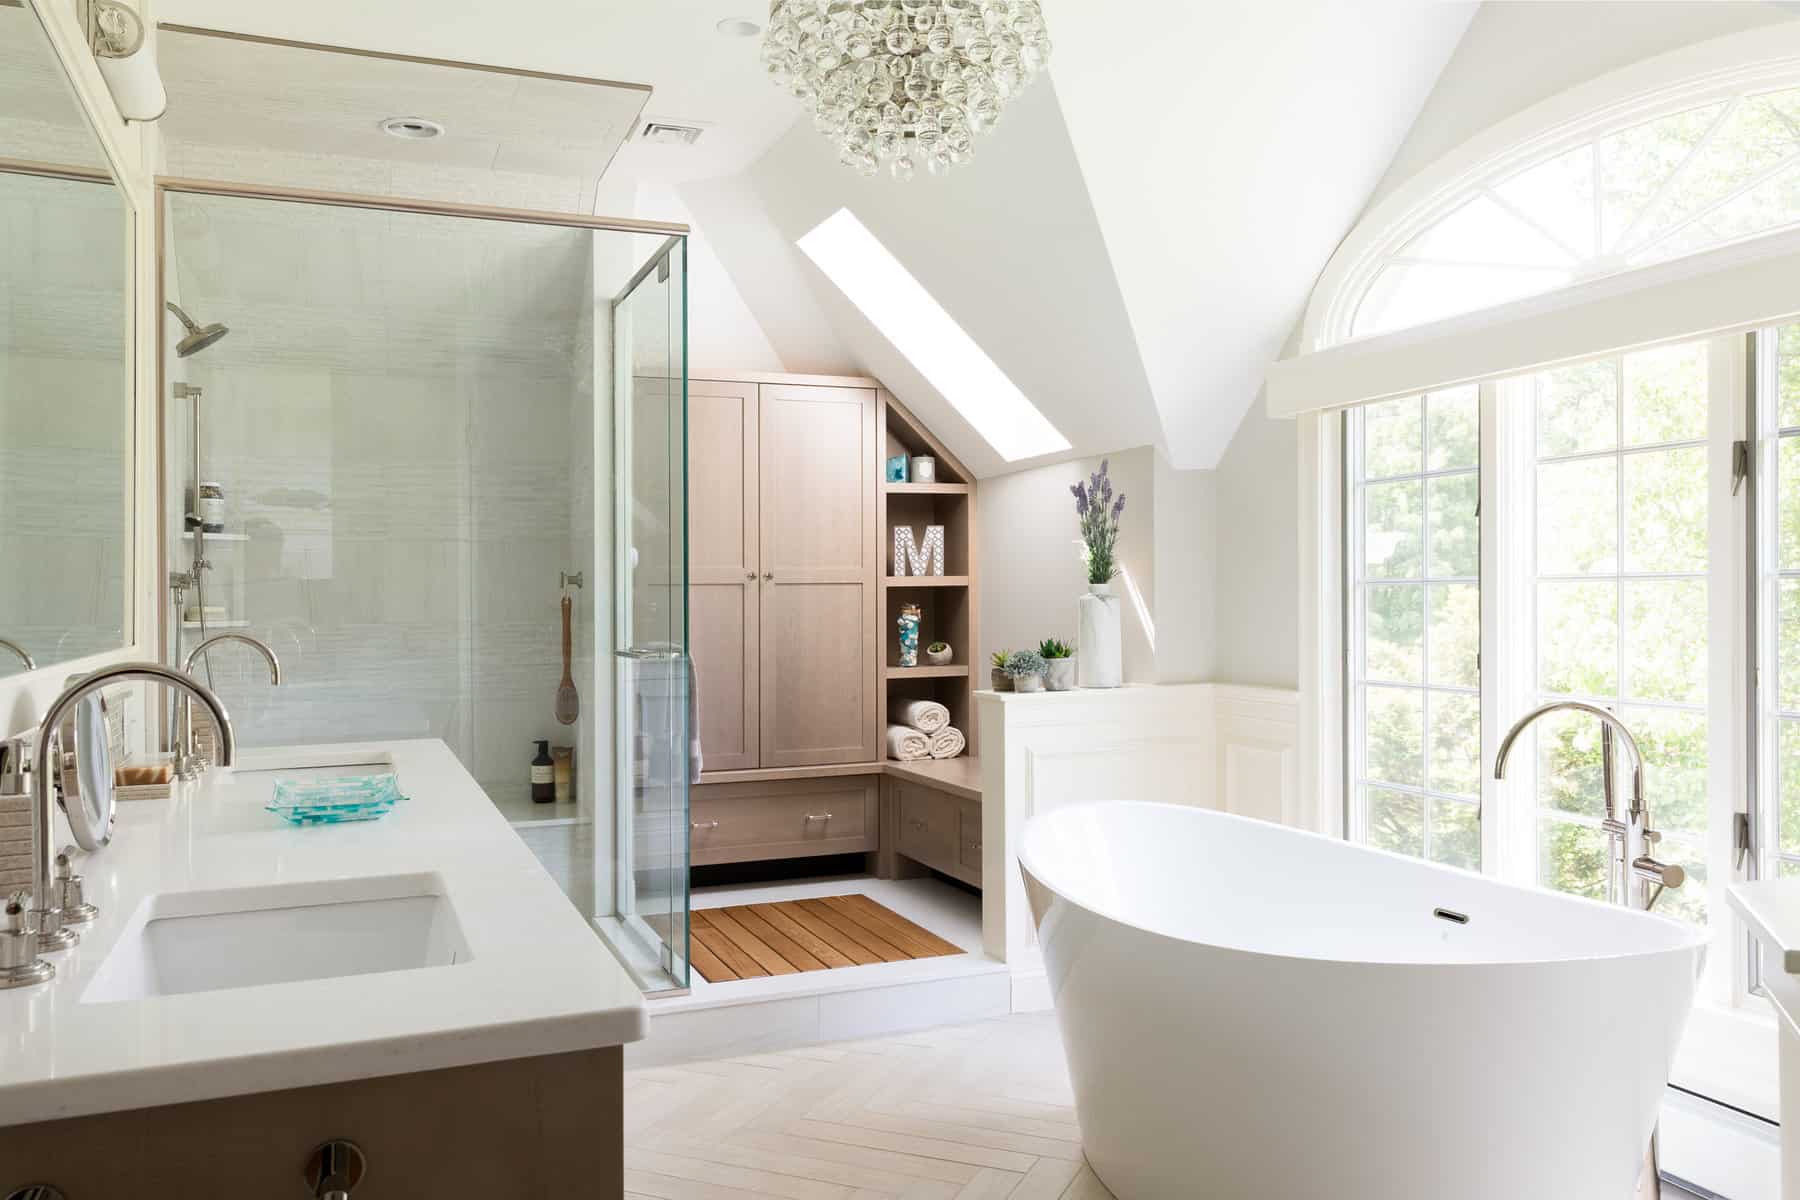 RELAXING RETREAT MASTER BATH-A custom drying space outside the shower is flooded with light from a new skylight. It features an inset white oak drainable drying platform surrounded by custom cabinetry, including a built-in bench and linen closet.